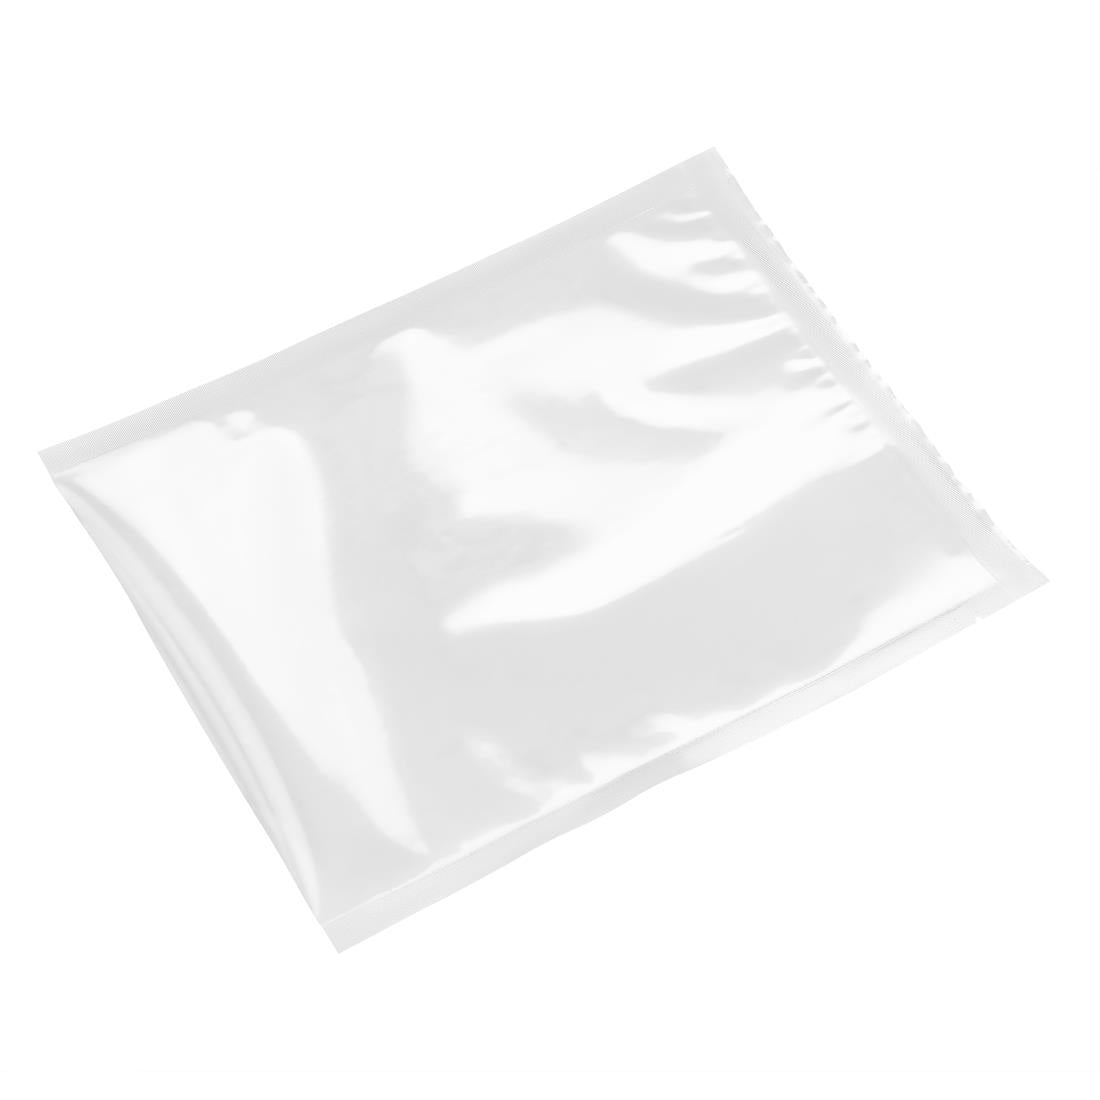 CU386 Vogue Chamber Vacuum Pack Bags 200x250mm (Pack of 100)